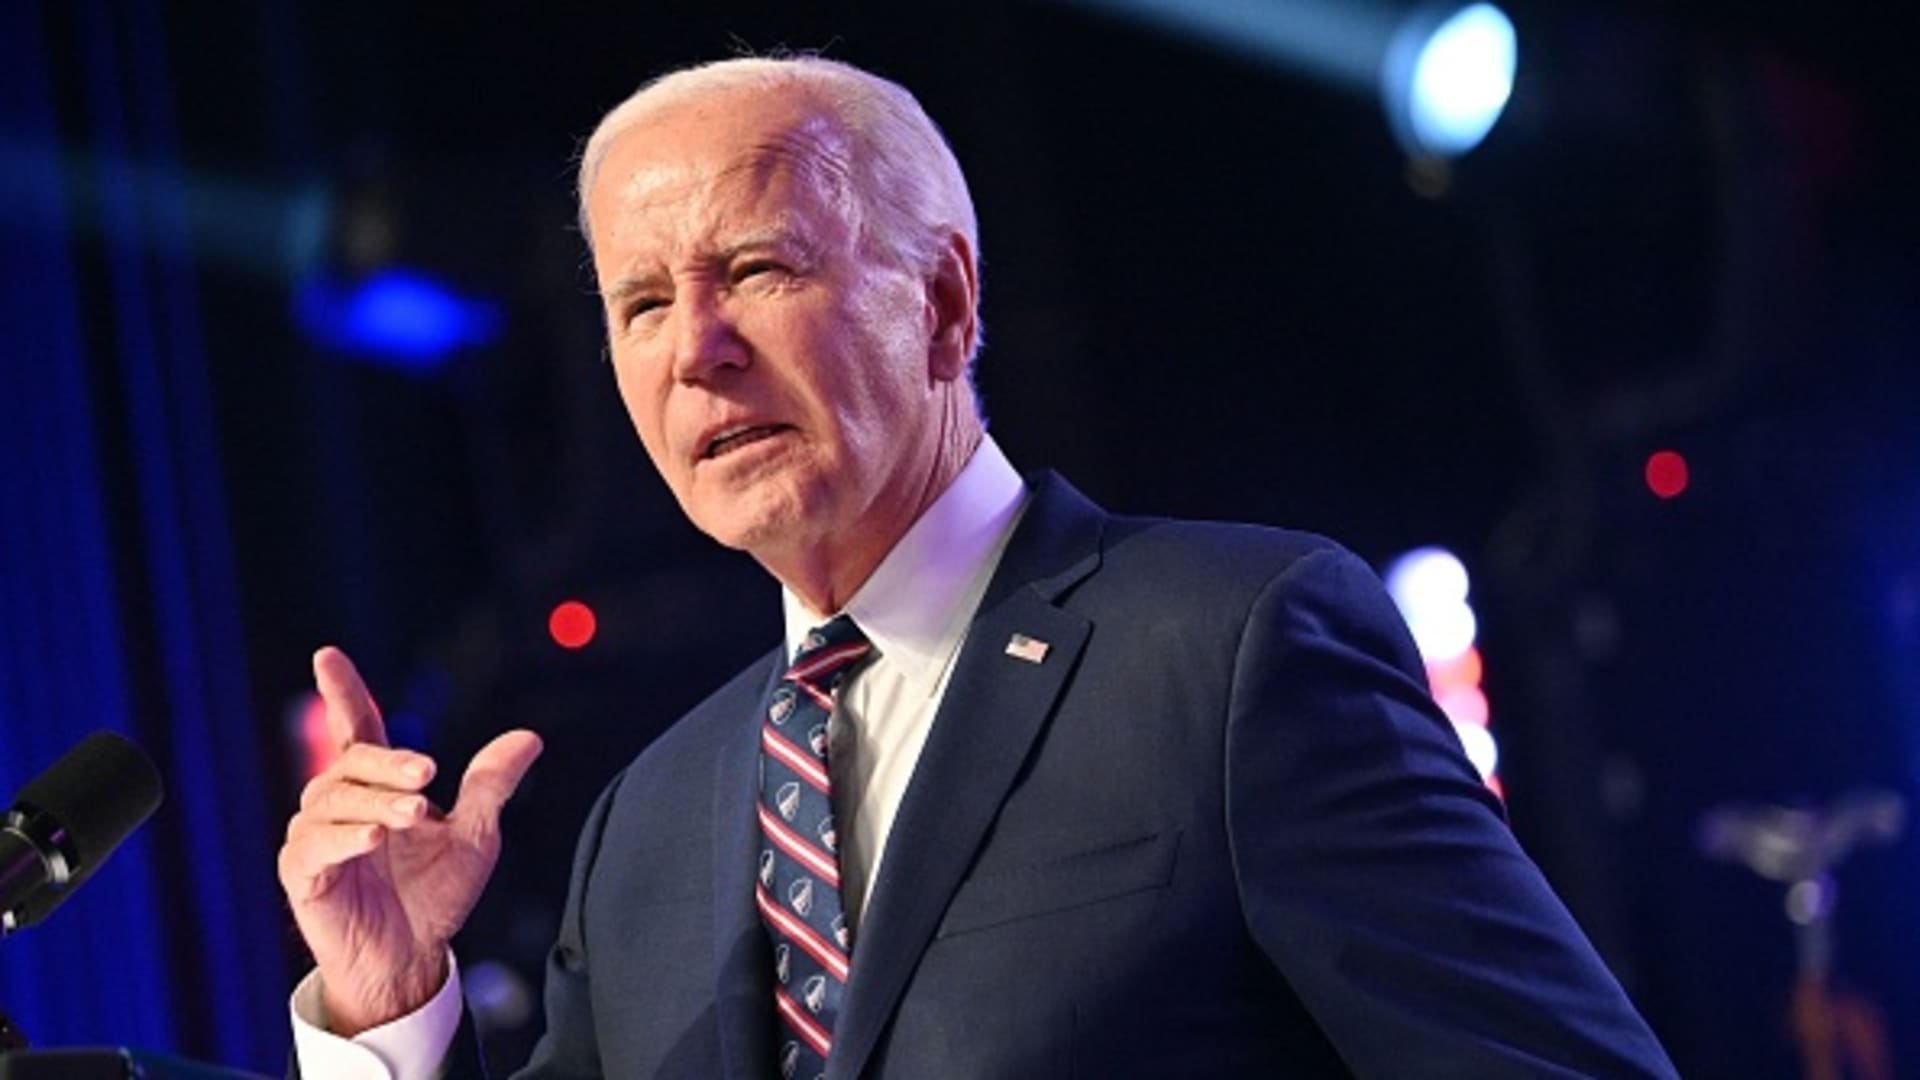 Biden administration to early forgive balances of some student loan borrowers